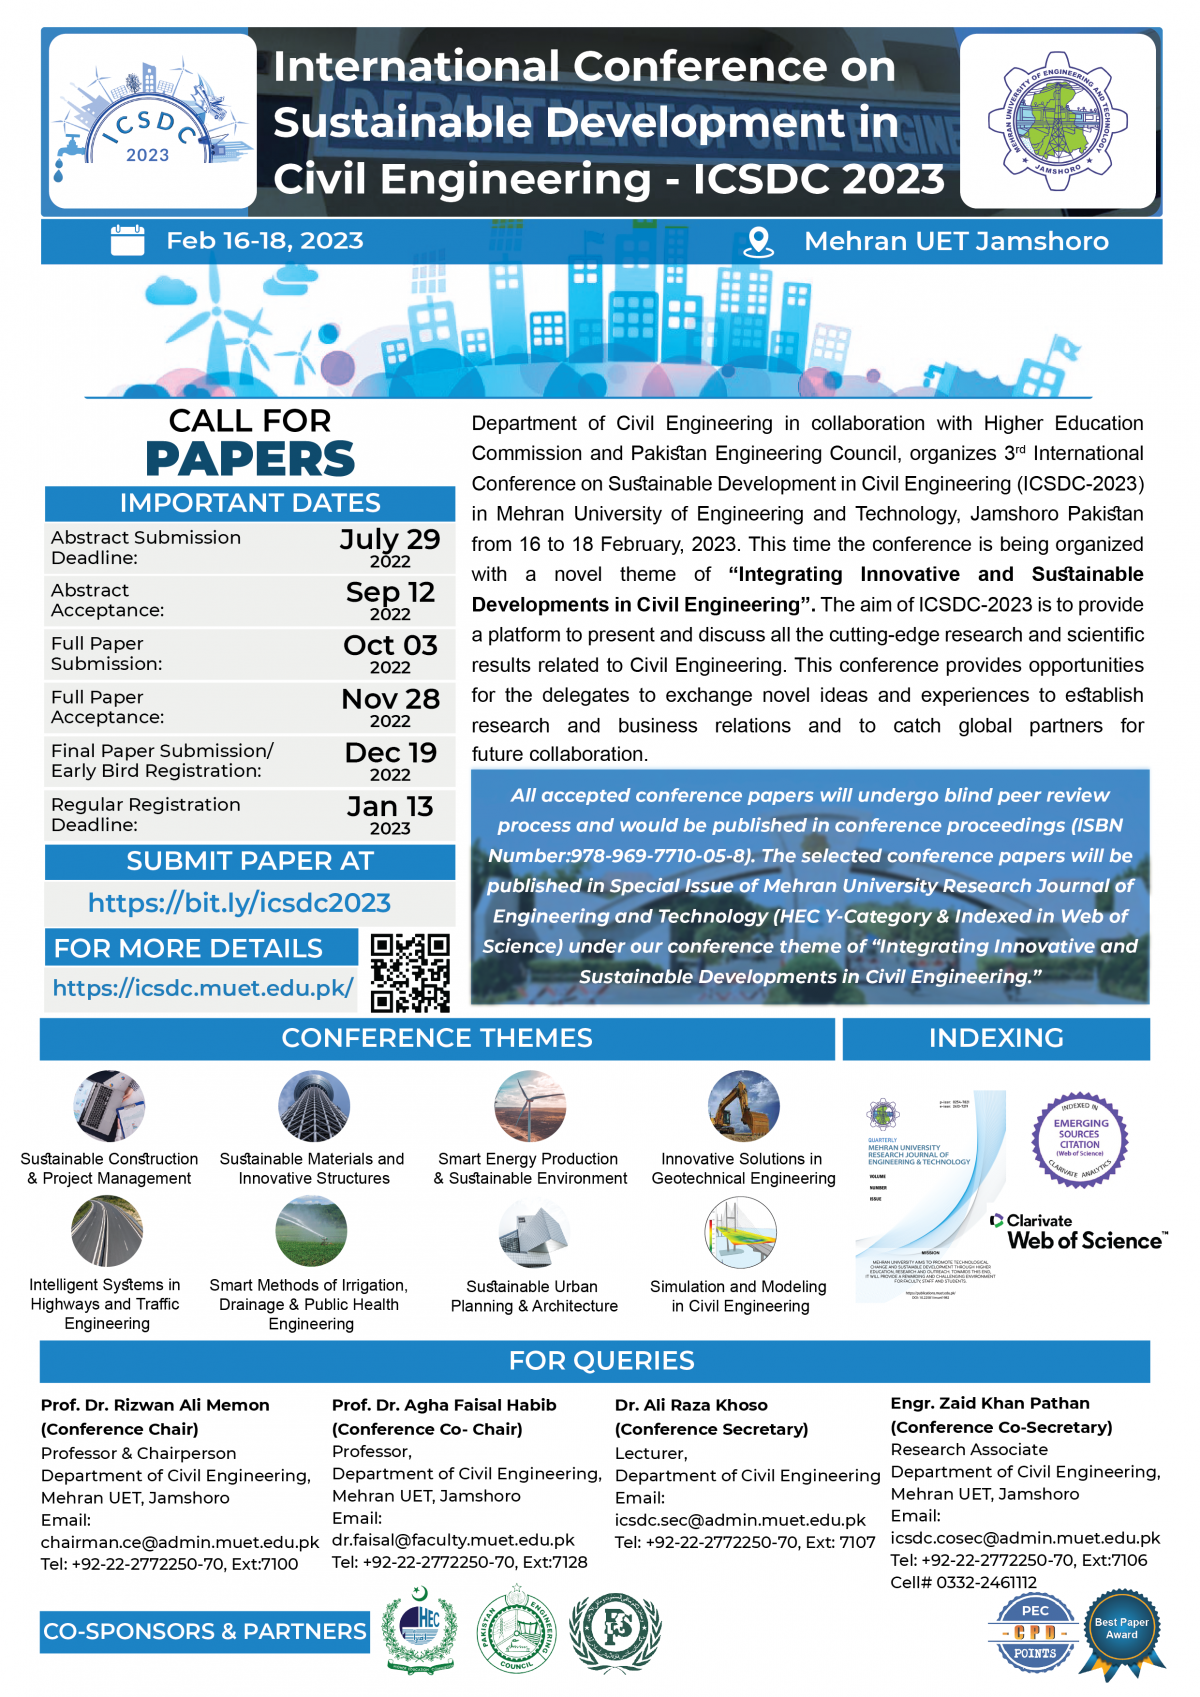 International Conference on Sustainable Development in Civil Engineering - ICSDC 2023